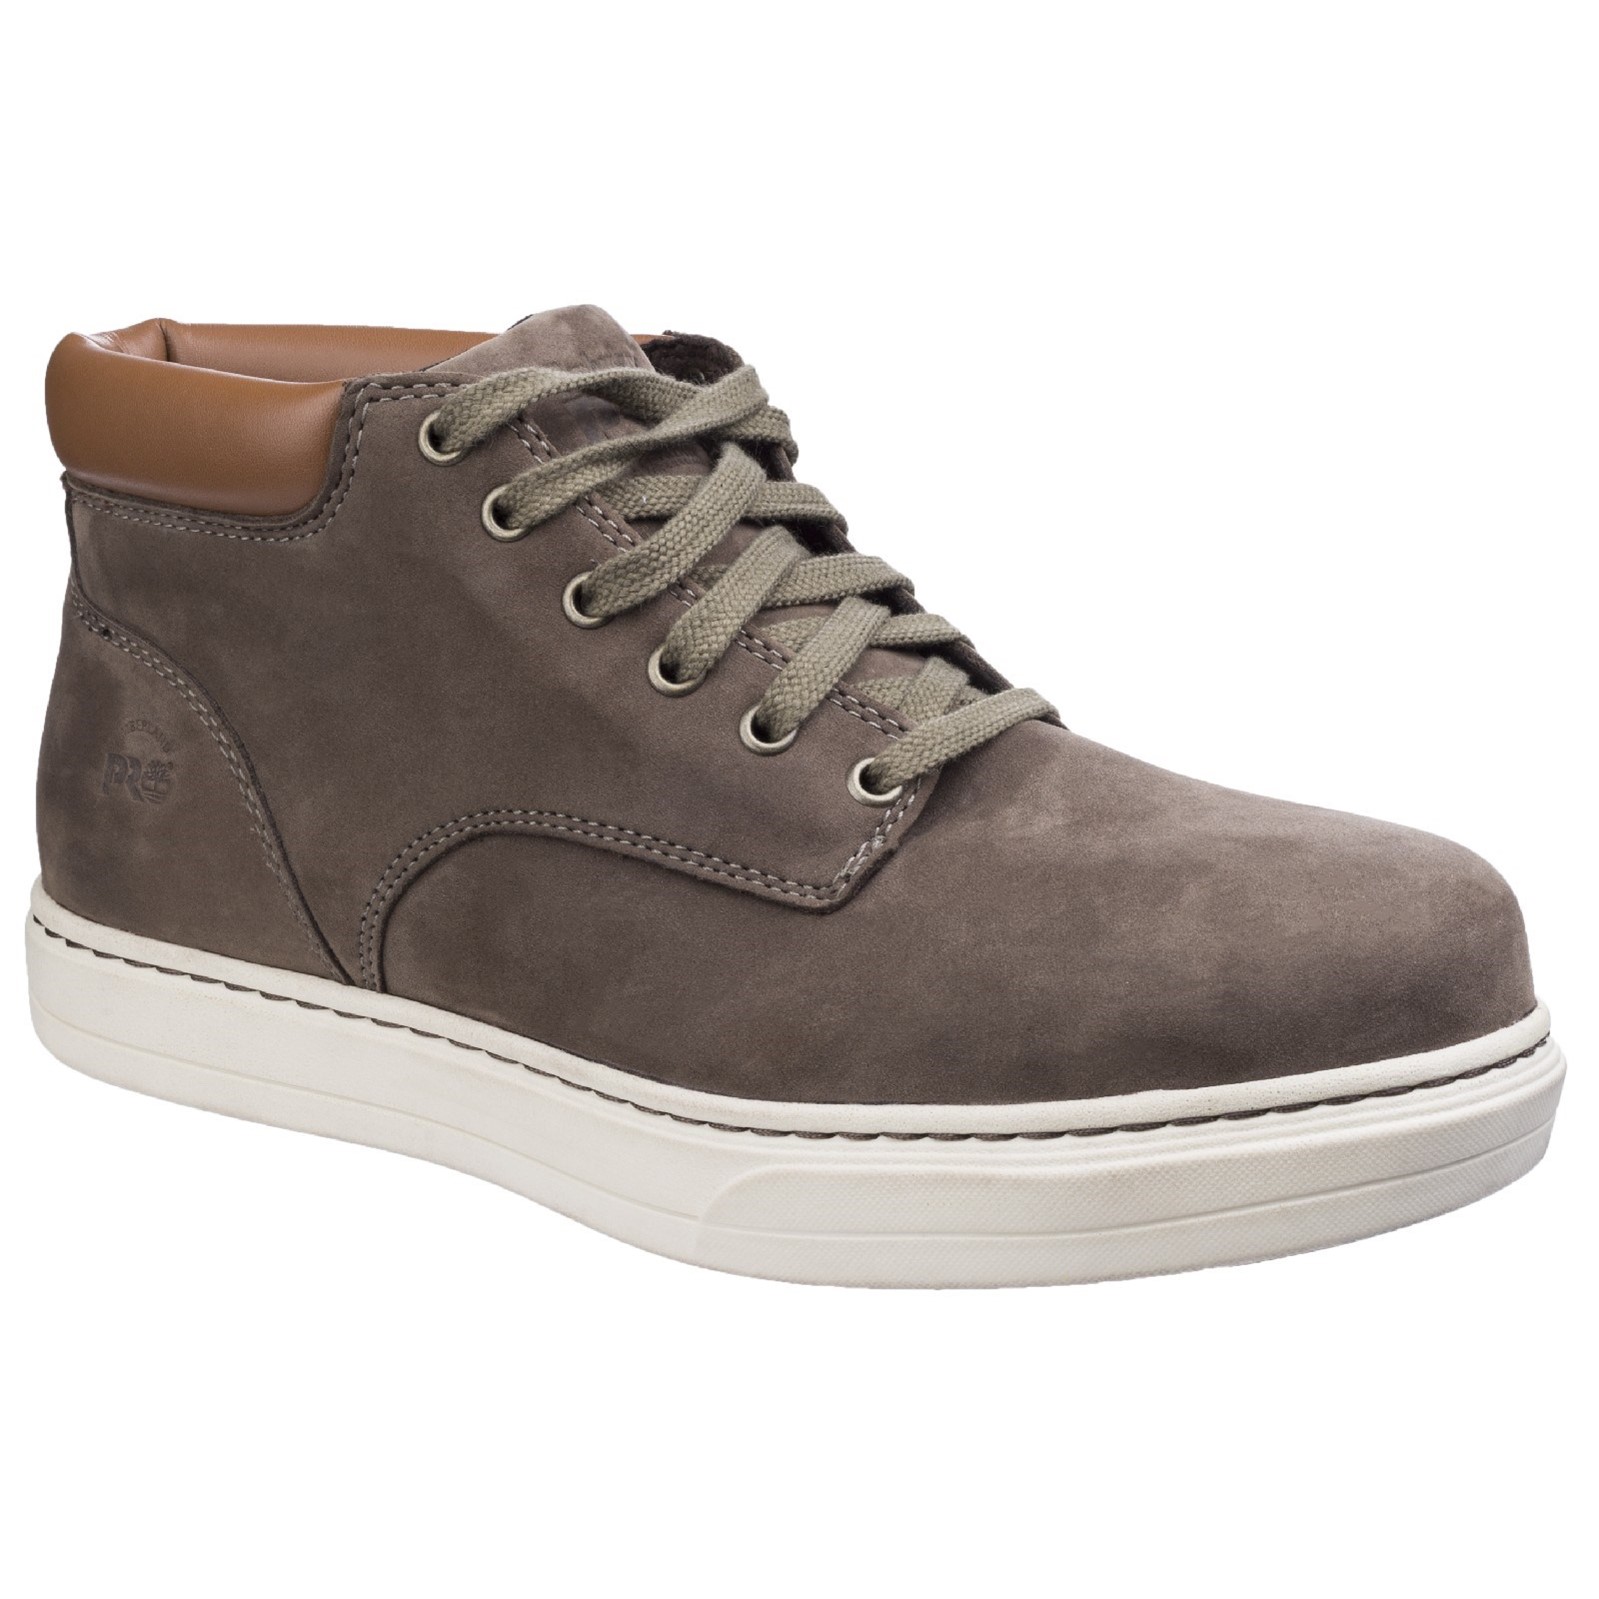 Disruptor Chukka Lace up Safety Boot